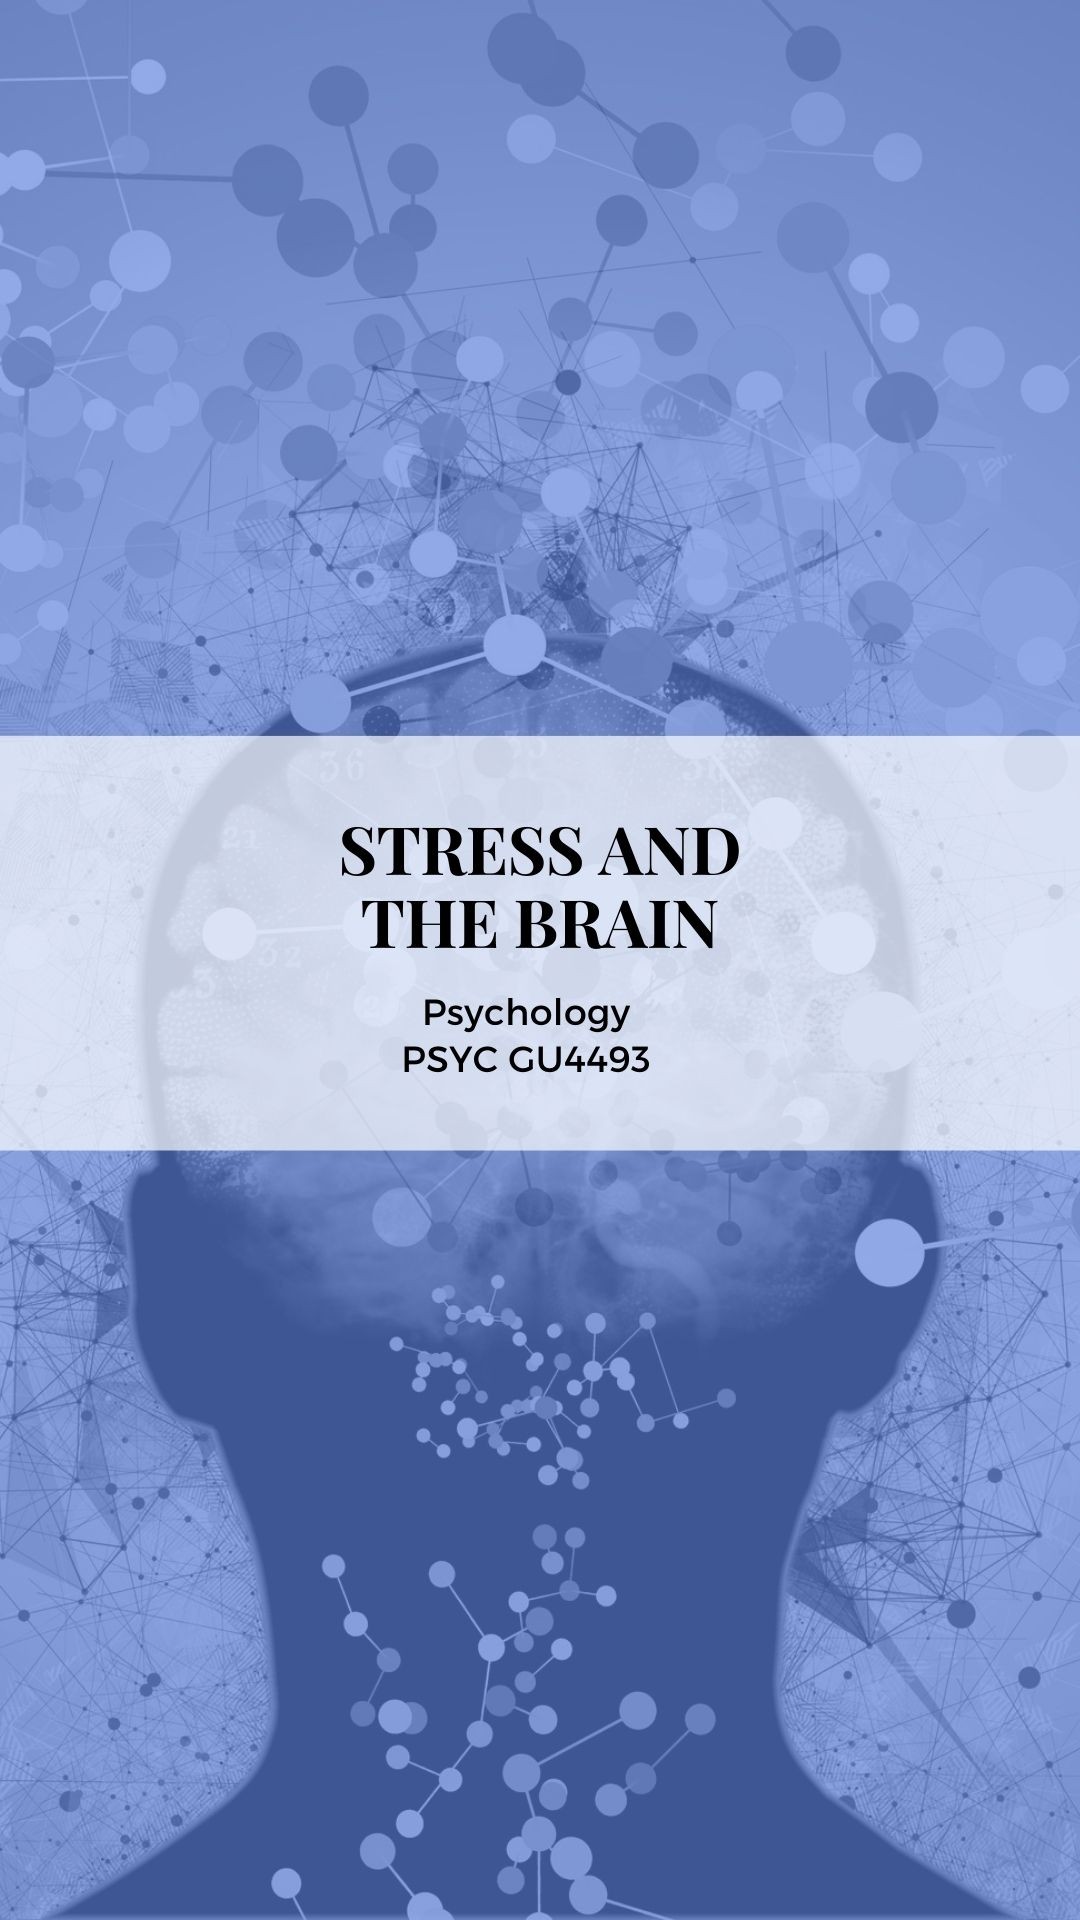 Spring 2021 class Stress and the Brain; course PSYC GU4493